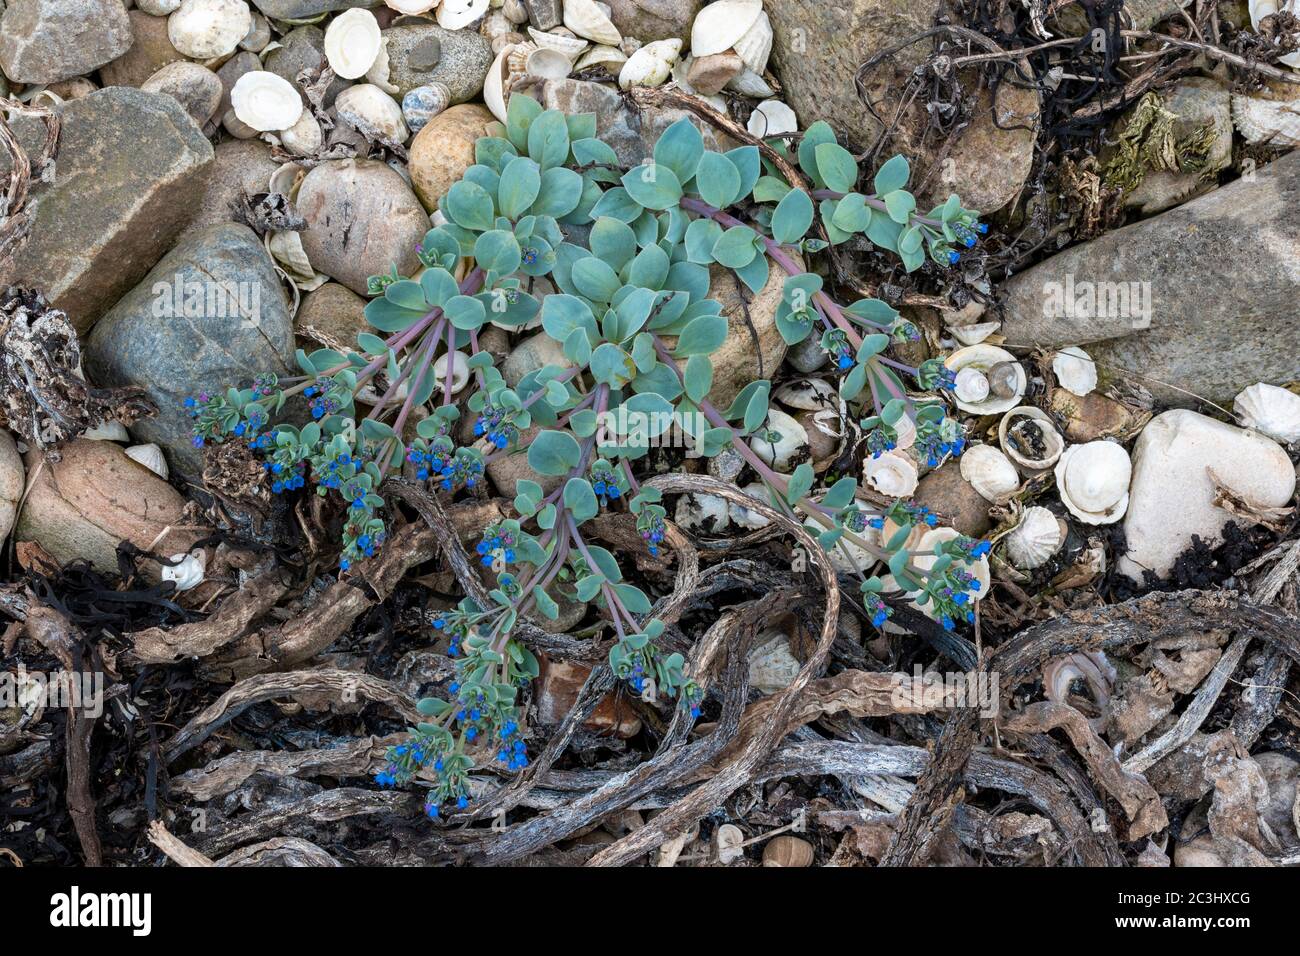 OYSTERPLANT Mertensia maritima BLUE GREEN PLANT AND STEMS WITH BRIGHT BLUE FLOWERS ON A SEASHELL AND DRIED KELP OR SEAWEED COVERED BEACH MORAY COAST S Stock Photo